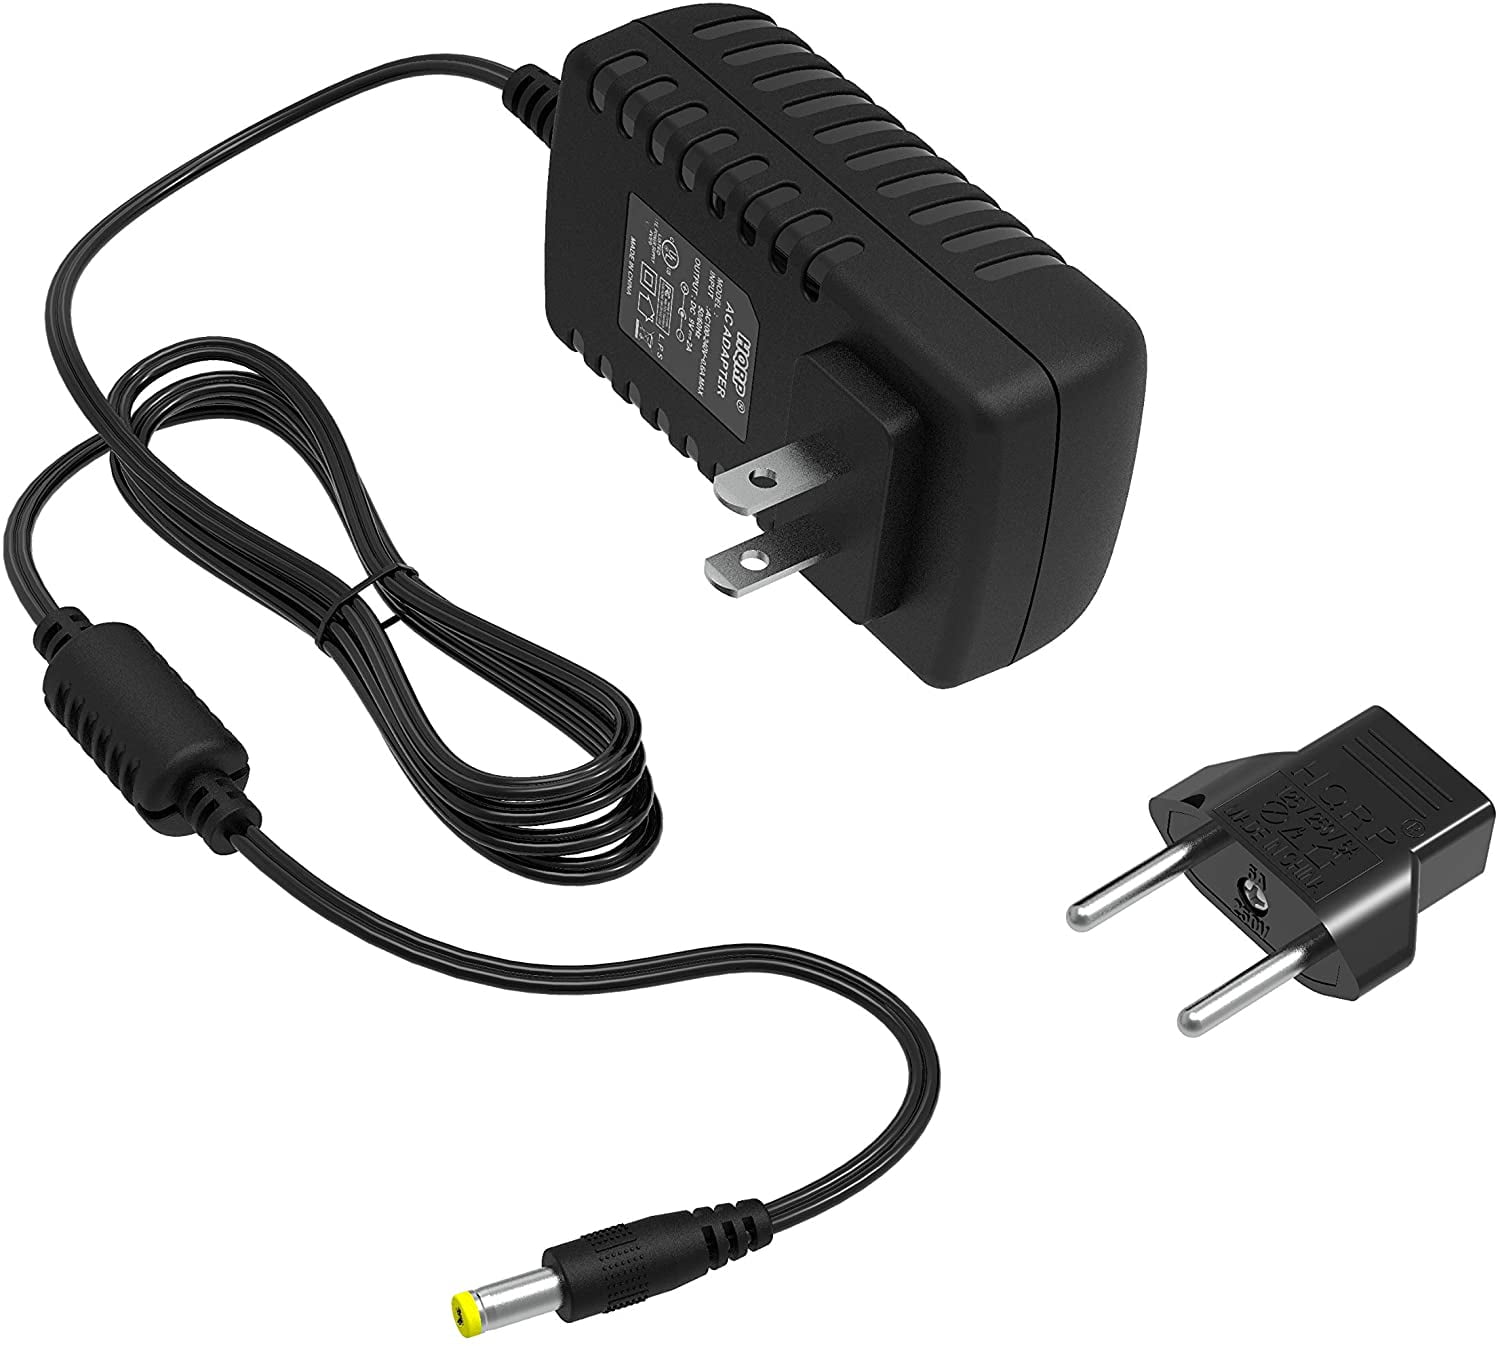 Roland GI-20 JV-50 Juno-Di Power Supply AC adapter cord Charger 